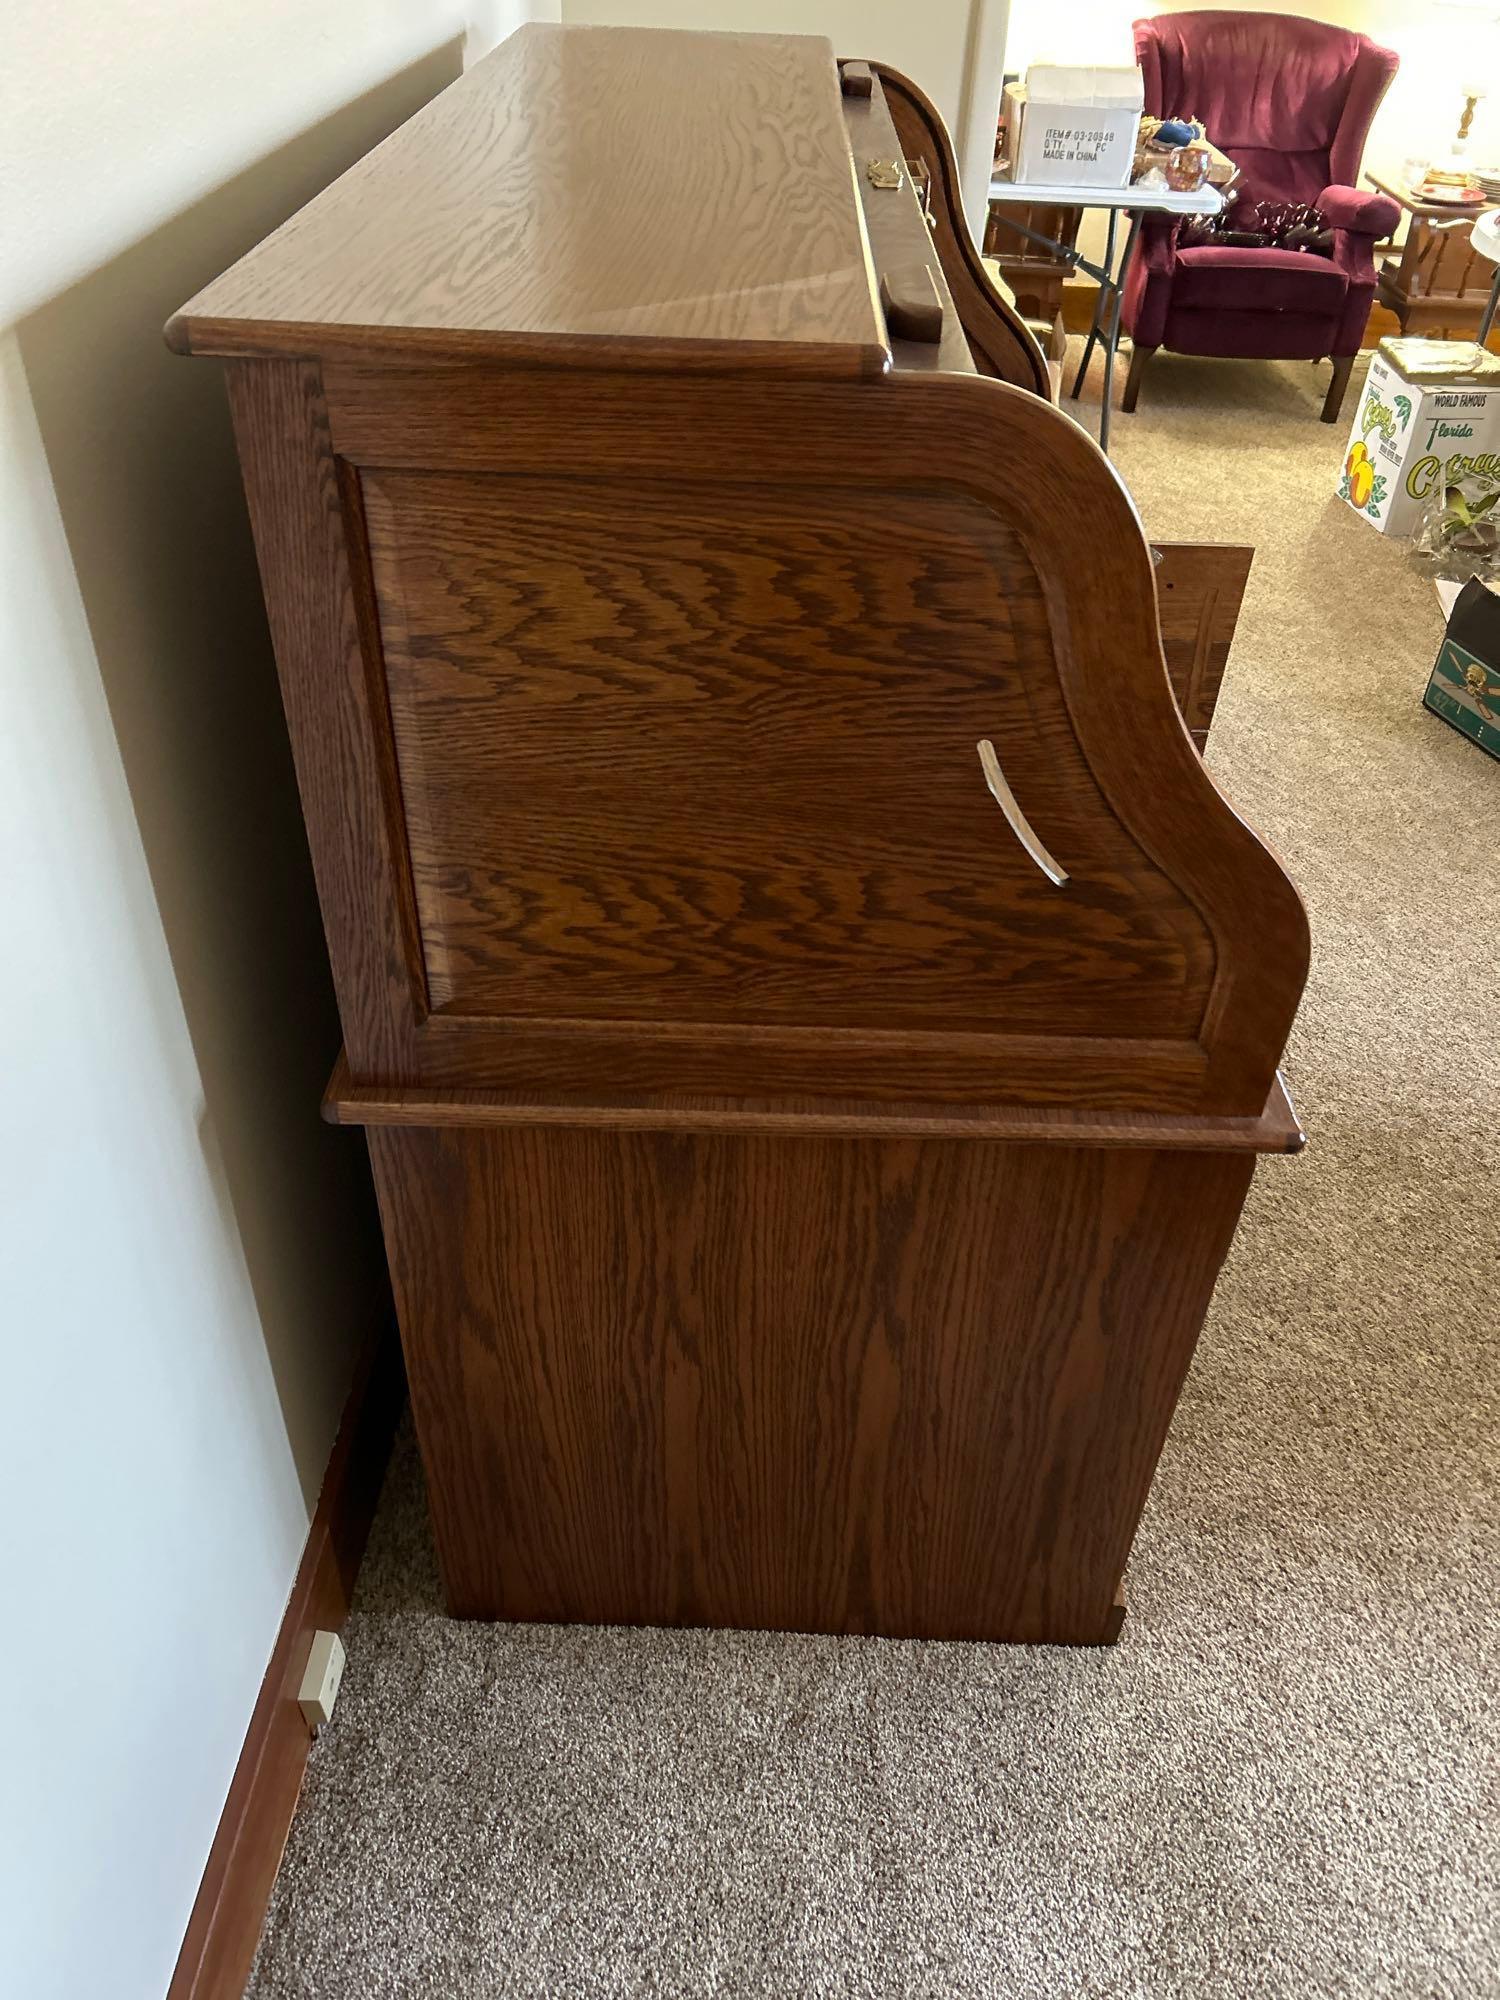 Oak roll top desk, 7 bottom drawers, locks.... Absolutely in excellent condition!!!